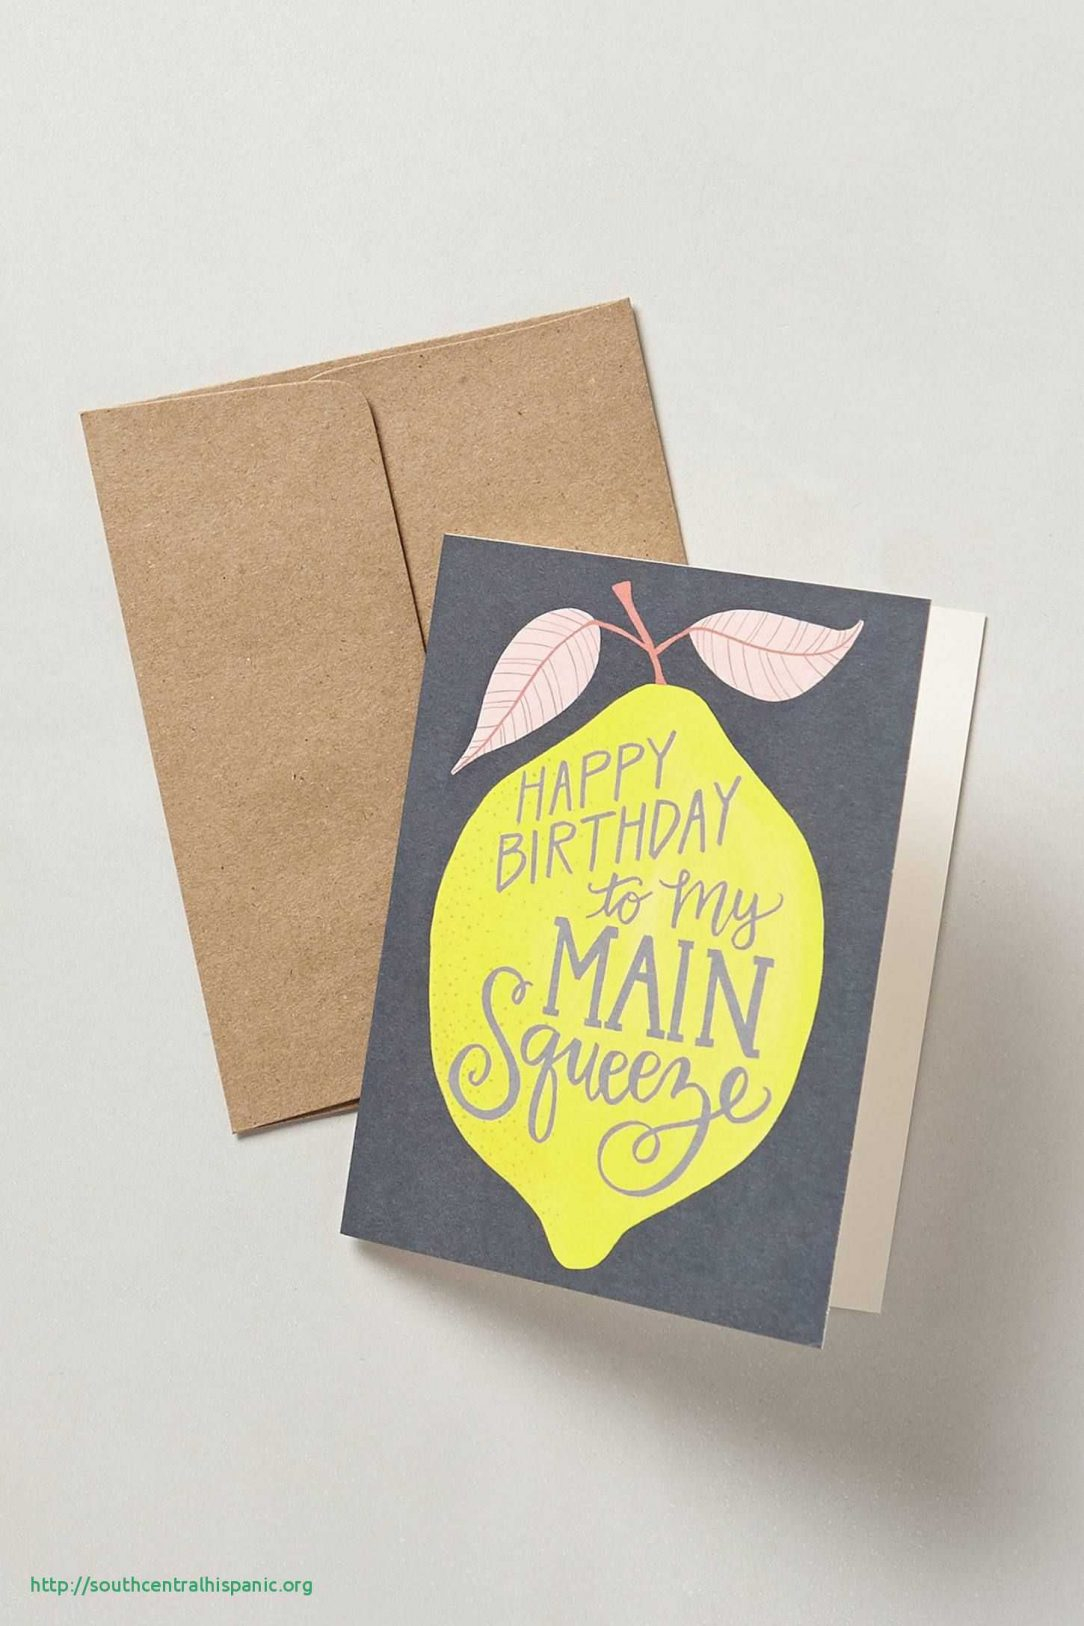 Cool Handmade Birthday Card Ideas Cool Birthday Card Ideas For Your Dad From Daughter Pinterest